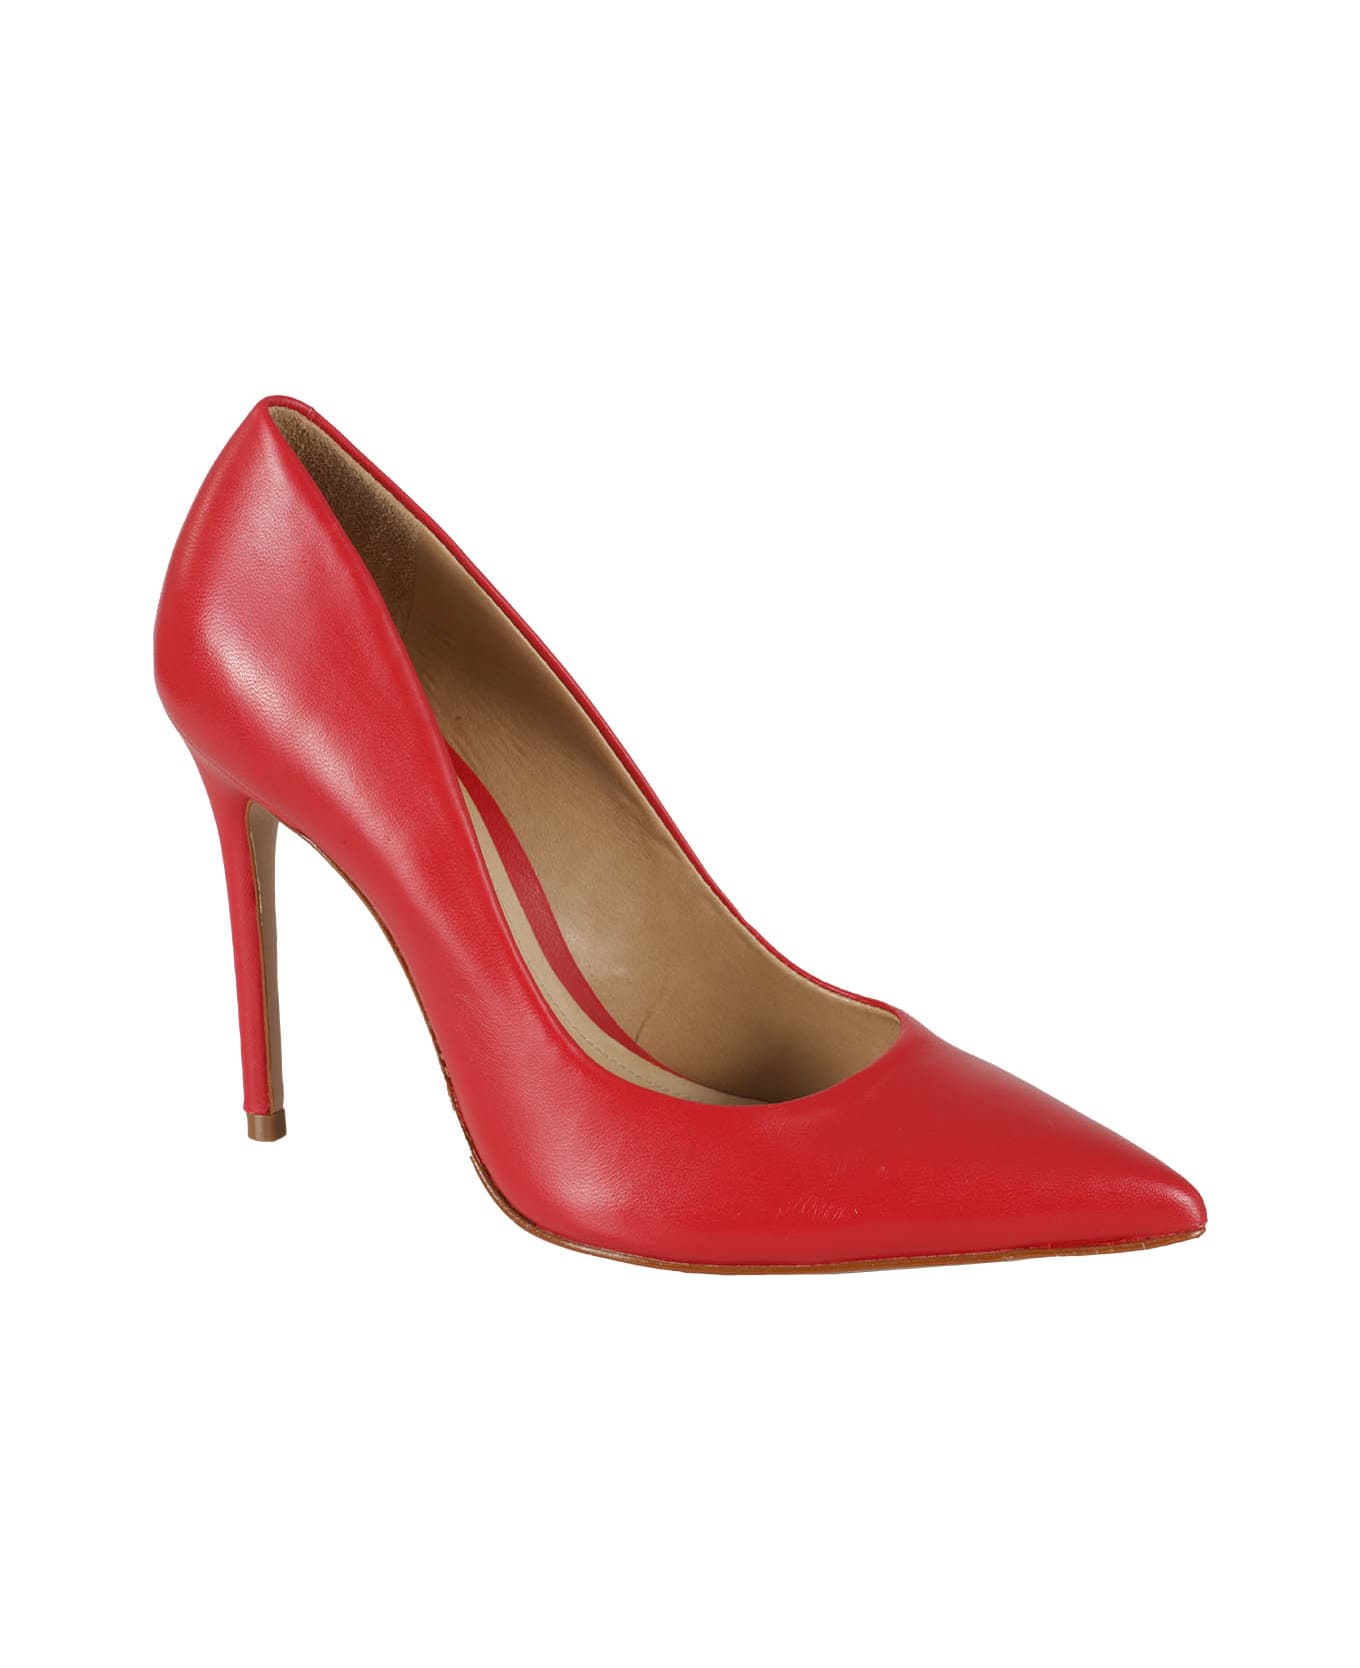 Schutz Shoes - Red ハイヒール